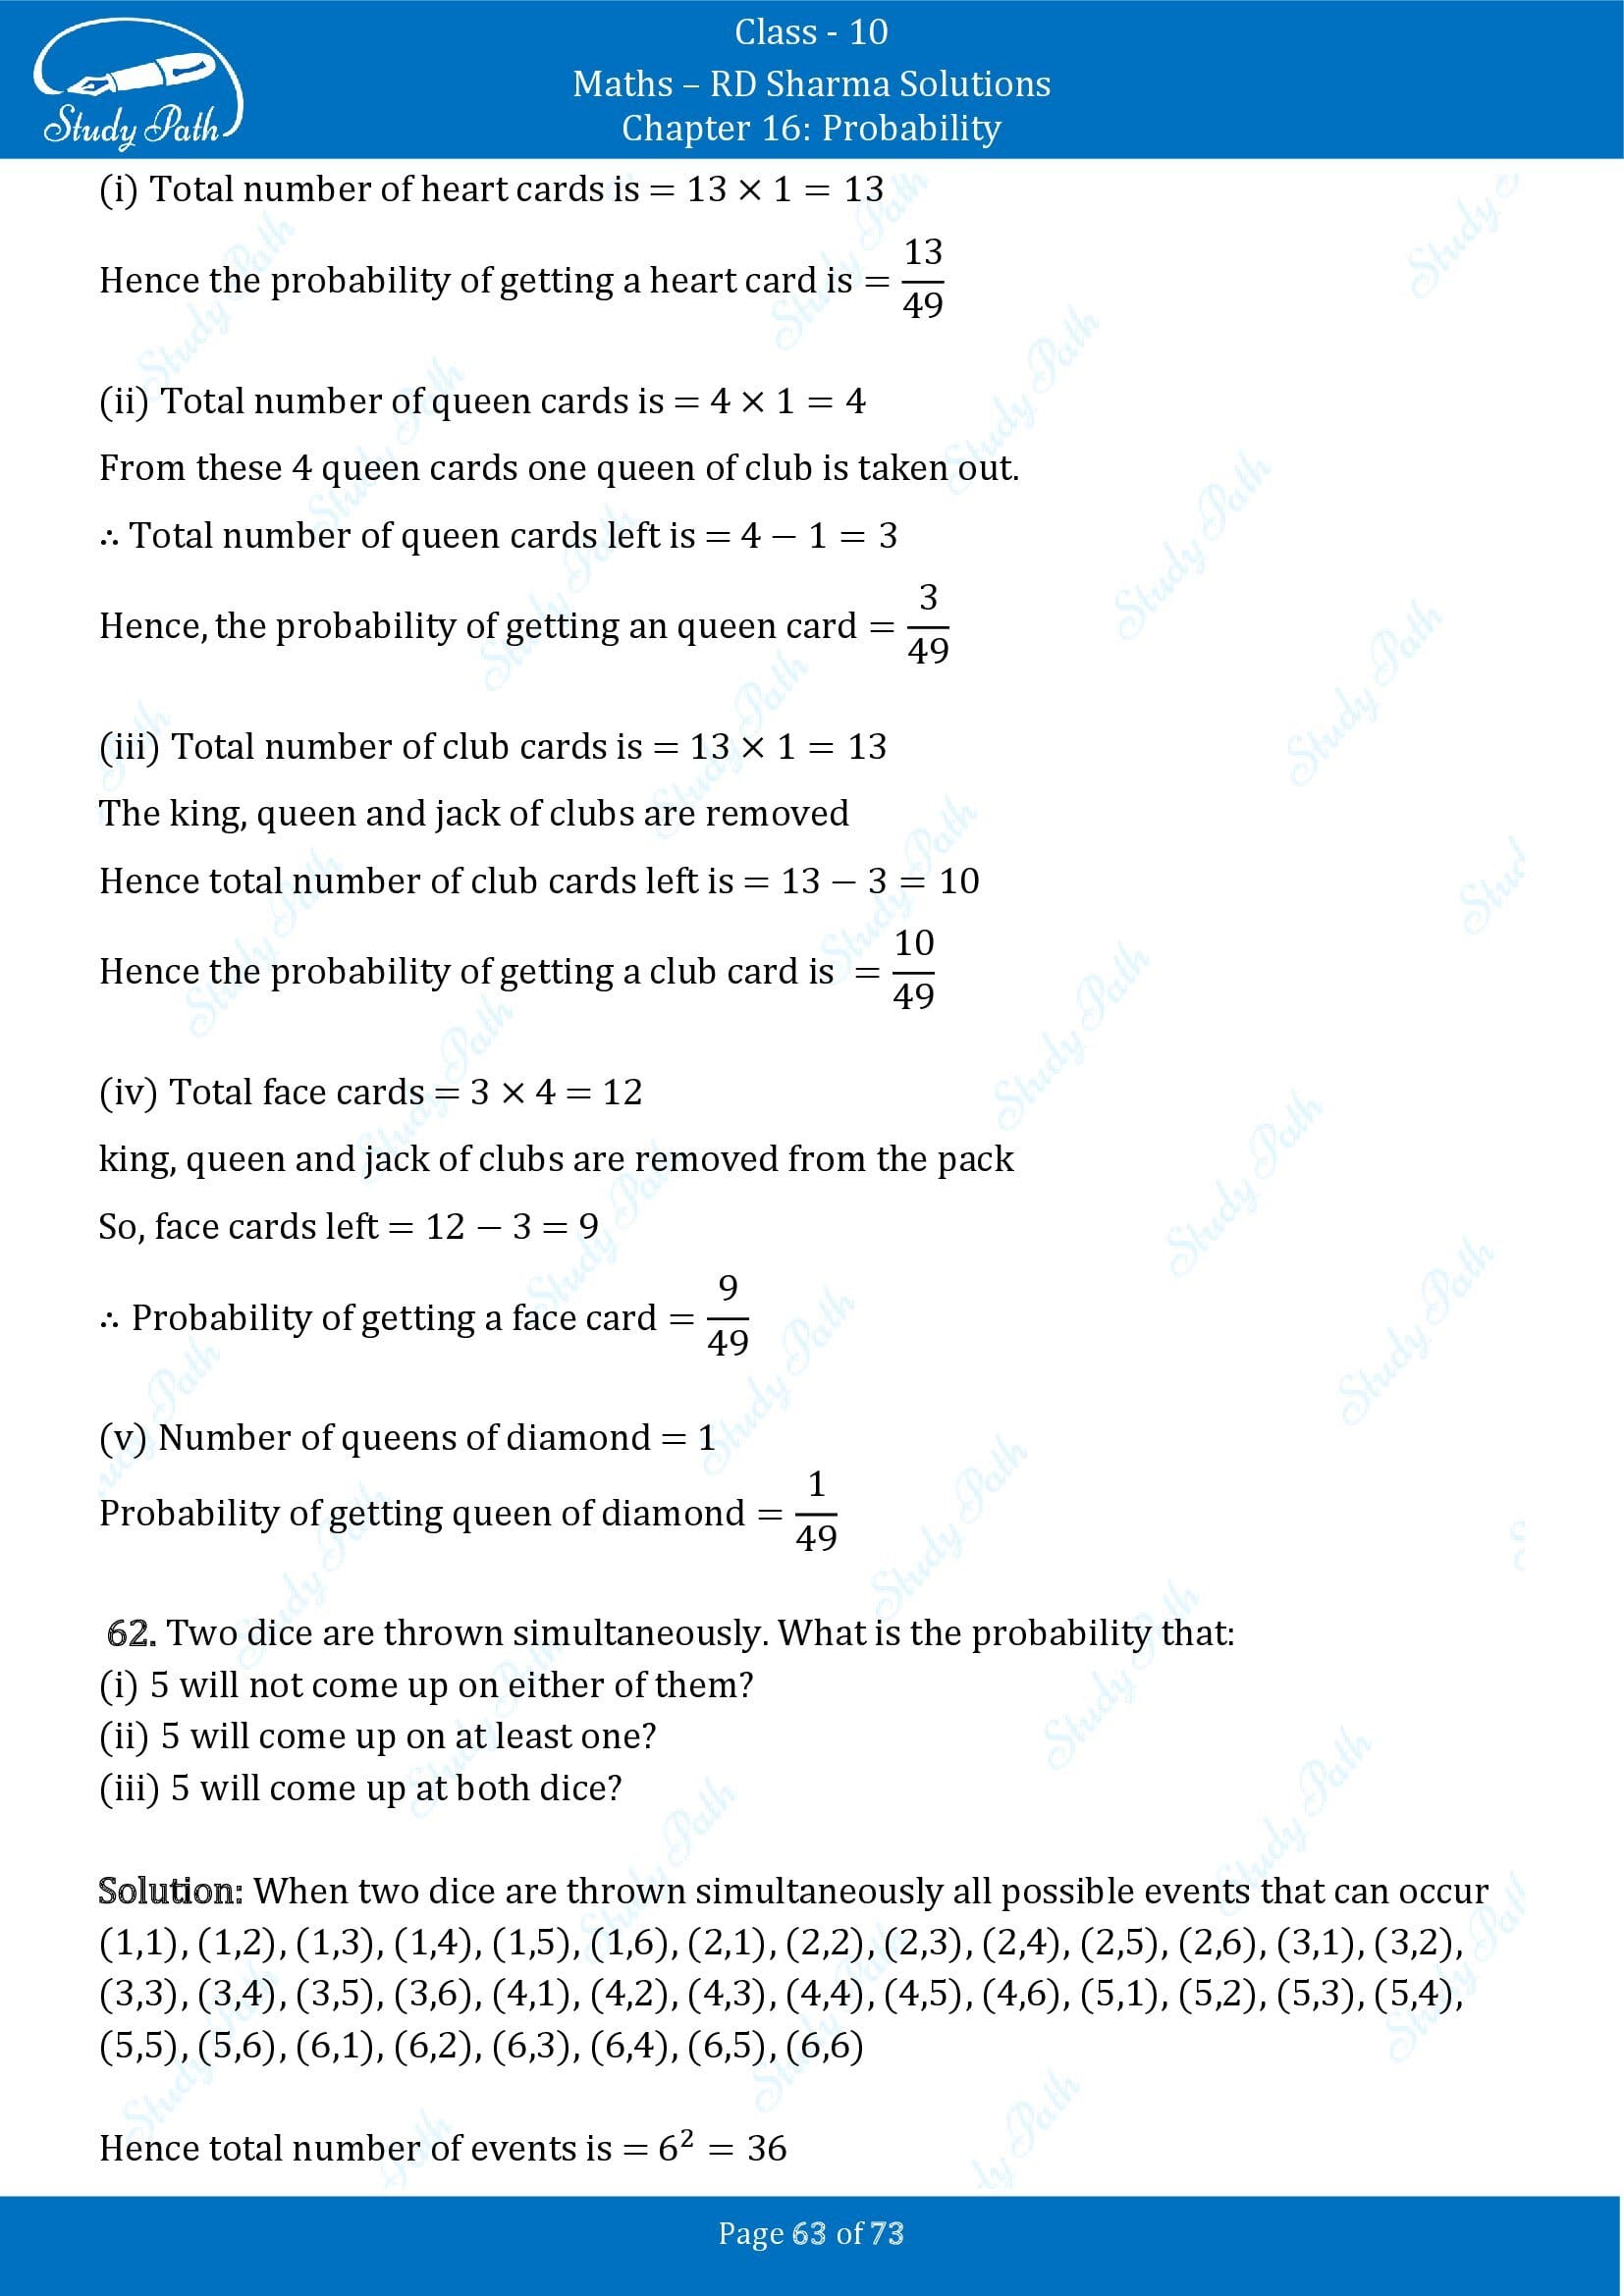 RD Sharma Solutions Class 10 Chapter 16 Probability Exercise 16.1 00063